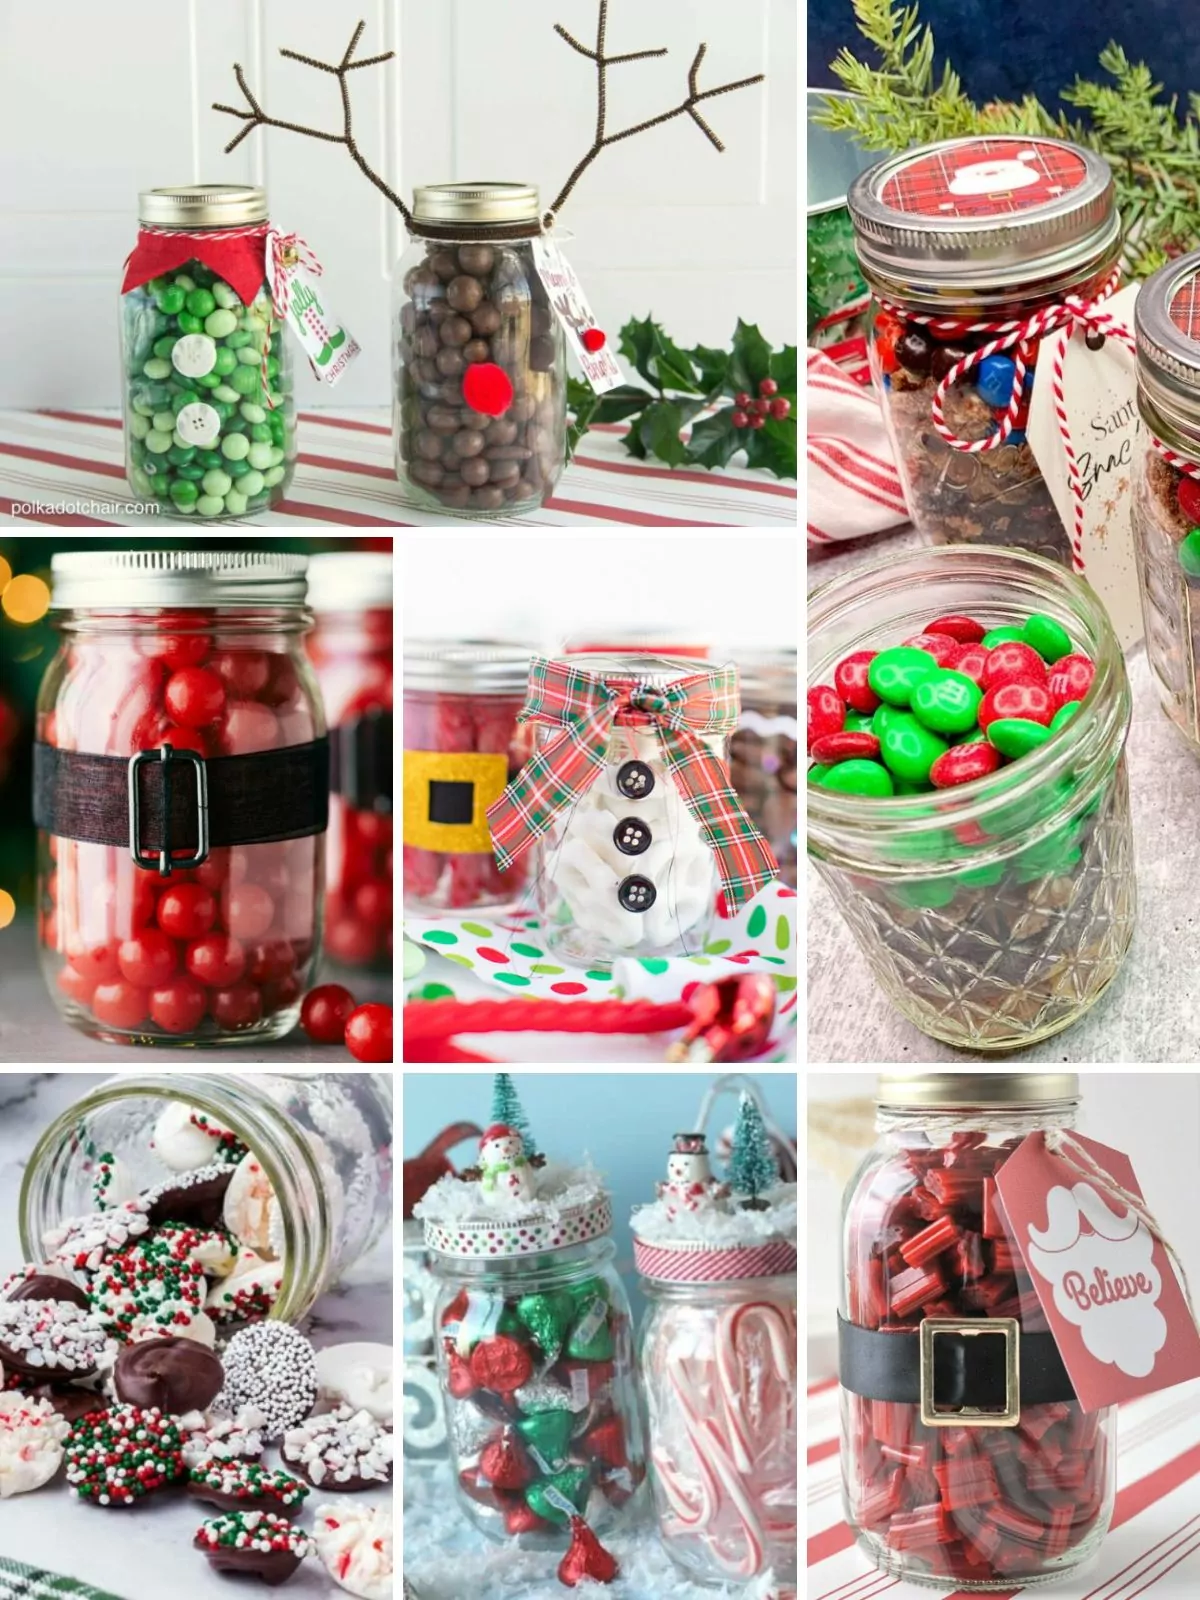 collection of candy recipes in mason jars for holiday gifts.